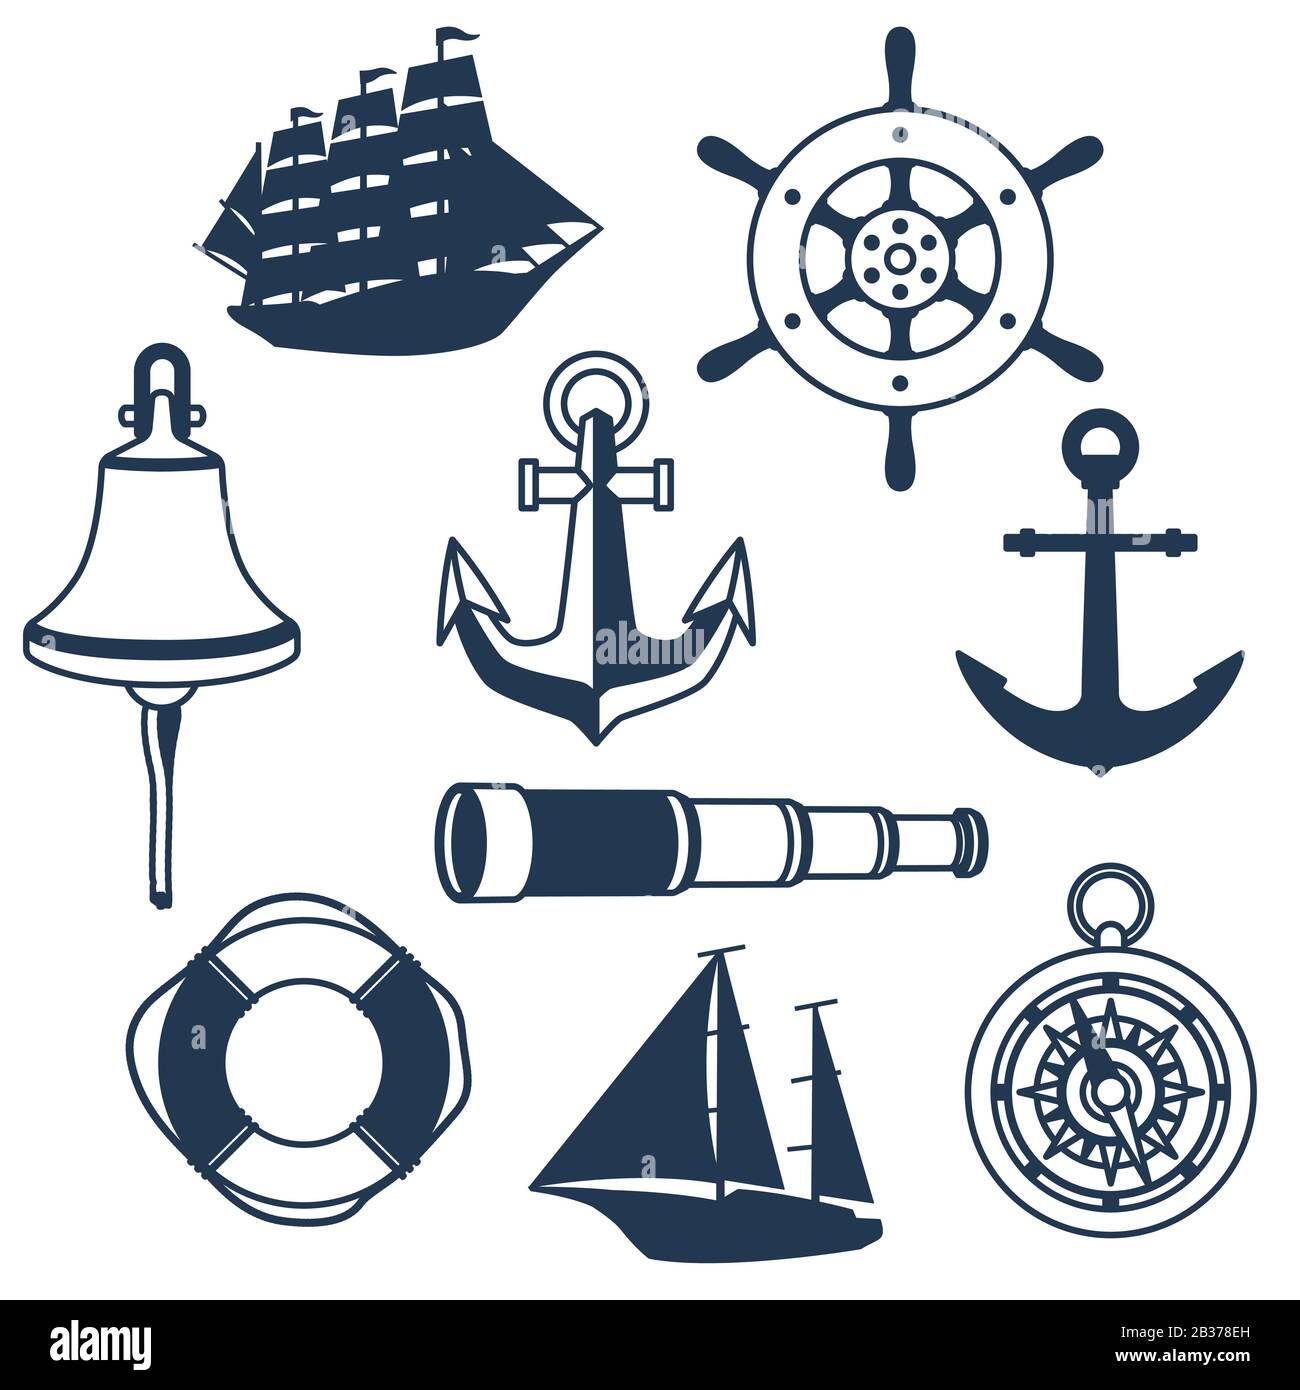 4-12x12" Posters NEW Nautical Anchor Compass Wheel and Buoy on Chevron 